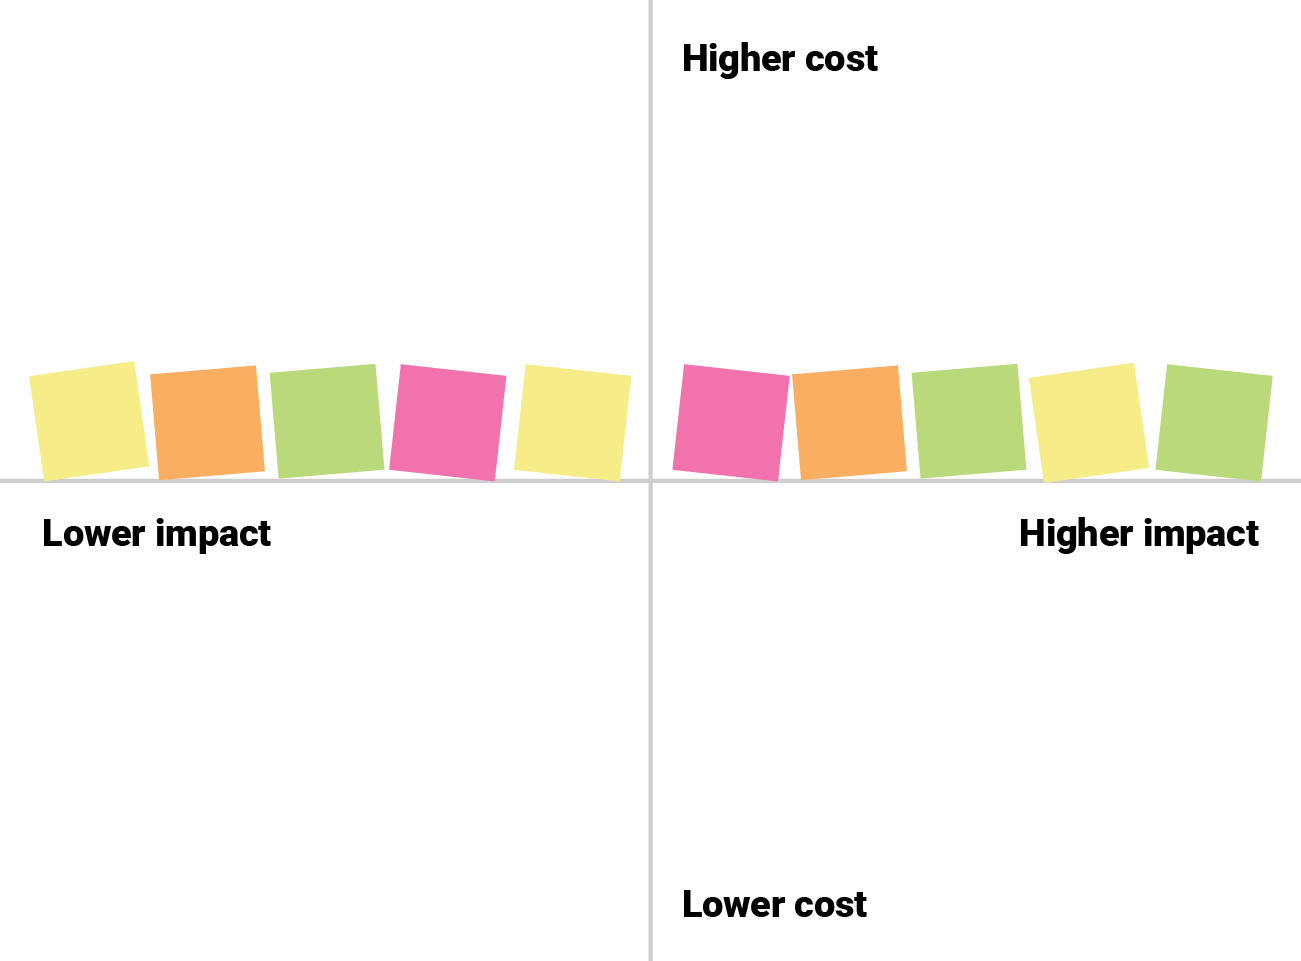 Prioritization Matrix arranging x axis higher to lower impact